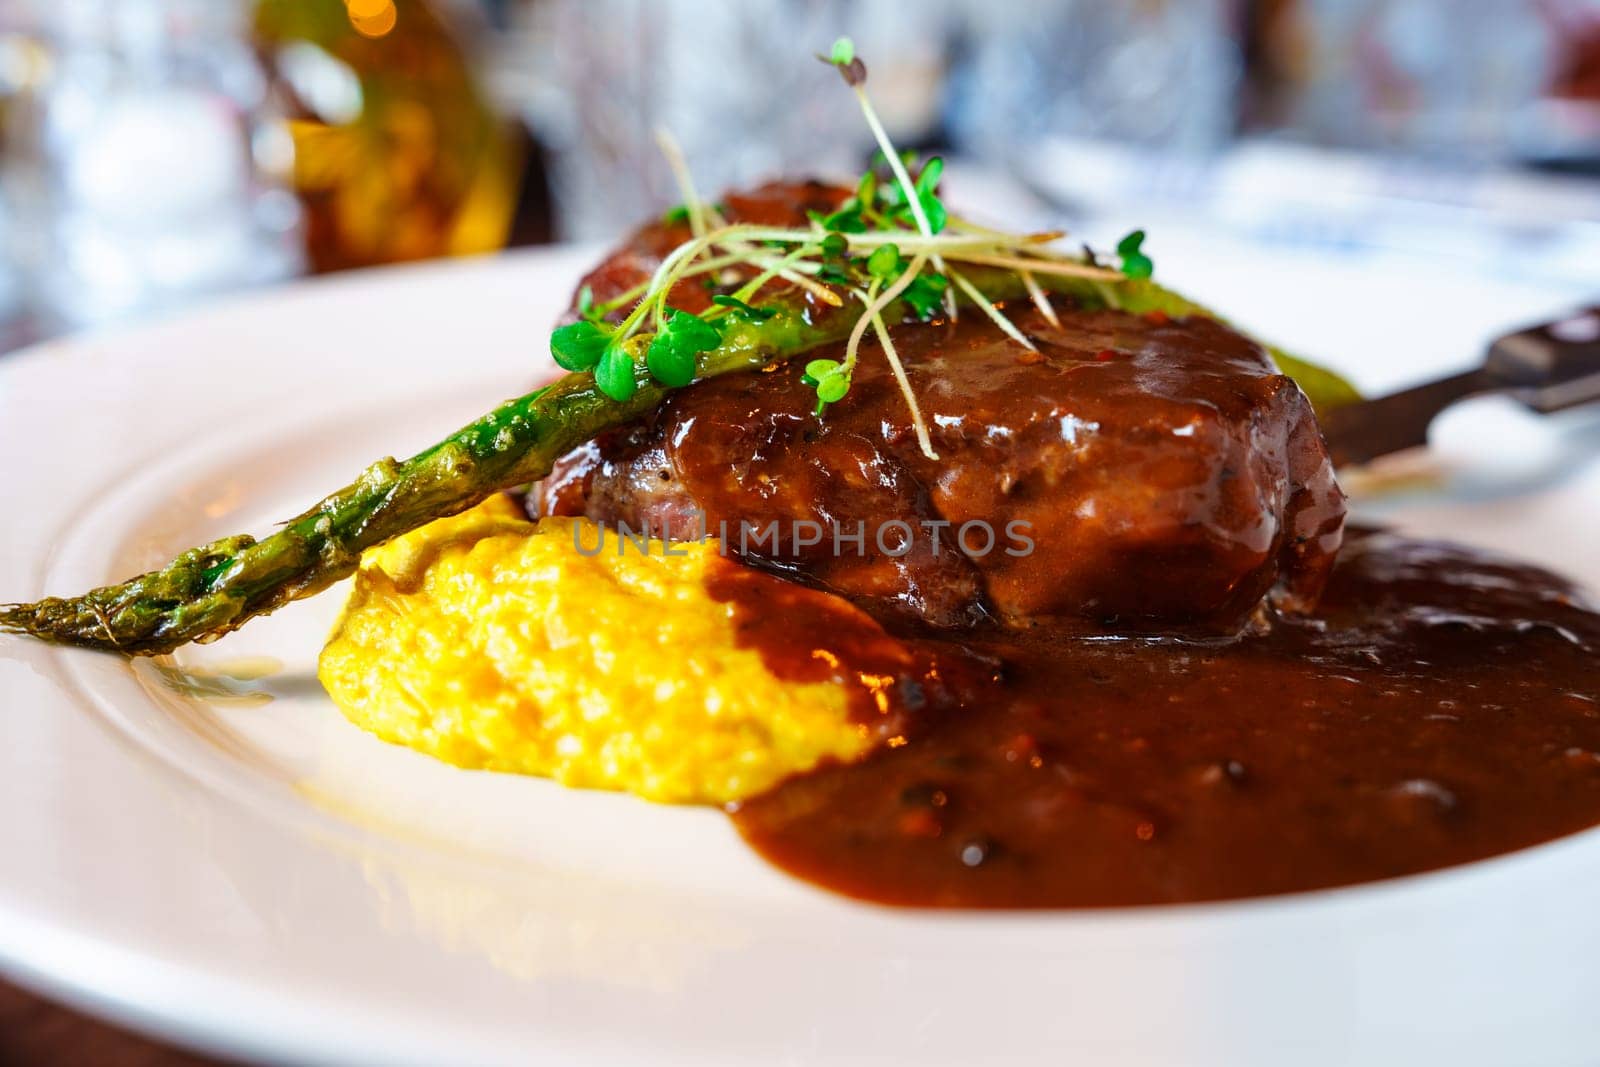 Delicious Steak with Mashed Potatoes and Asparagus Served with Sauce on White Plate by PhotoTime